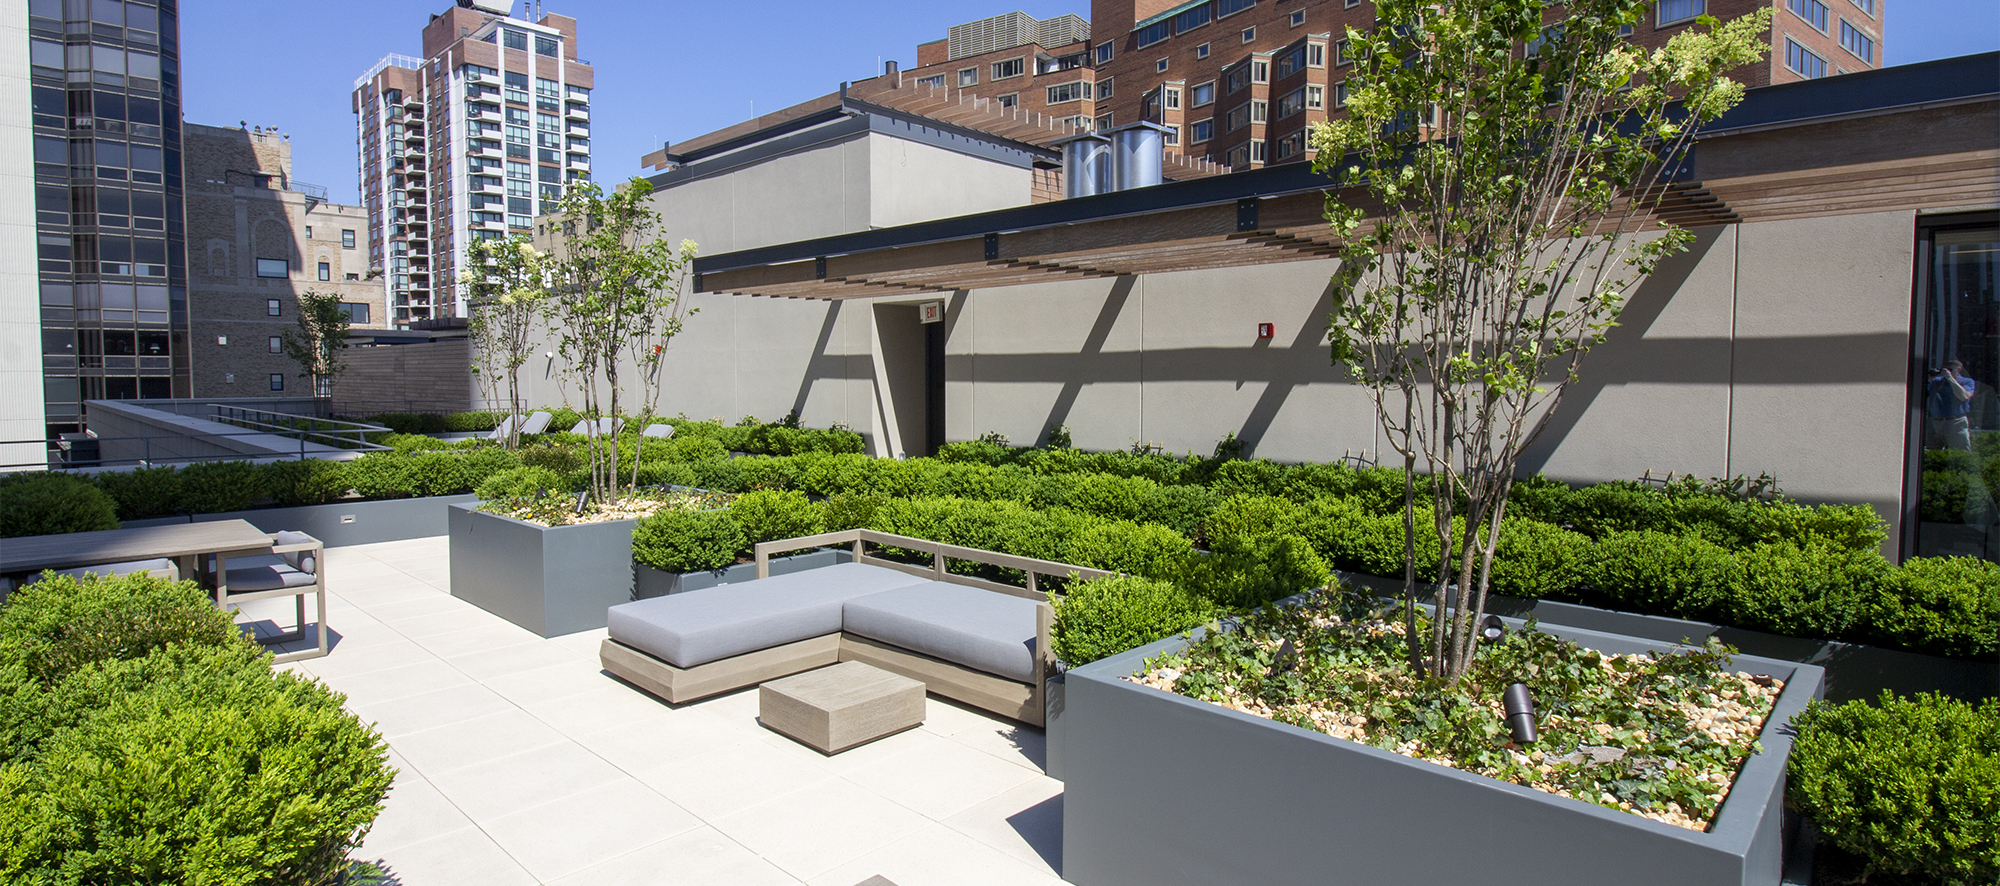 Seating areas and raised gardens sit atop Unilock Arcana slabs in a light color on the roof deck of 61 E banks roof in Chicago.